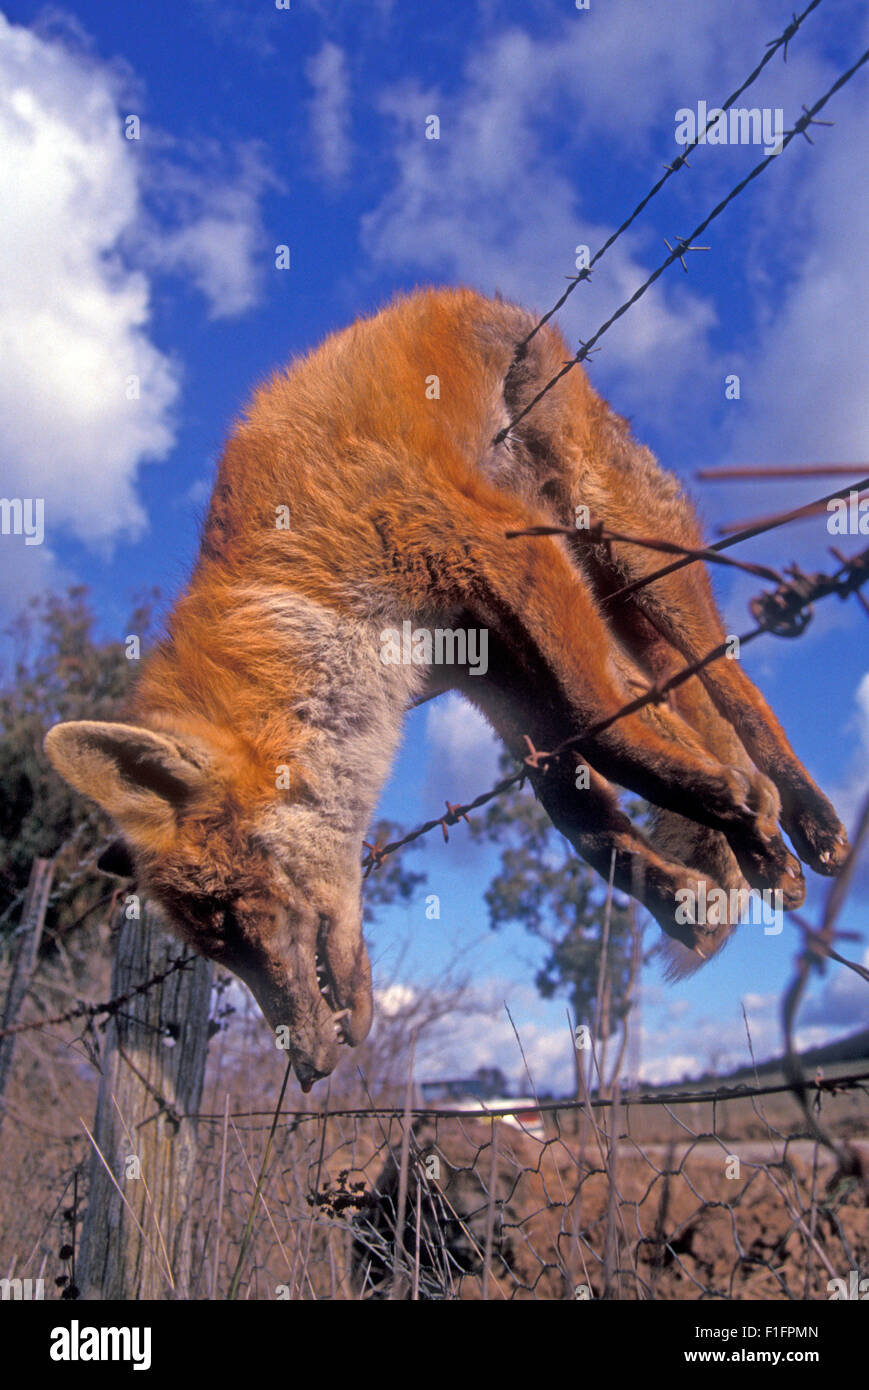 FARMERS USUALLY HANG DEAD FOXES OVER A FENCE TO SHOW PEOPLE THE SCALE OF THE PEST PROBLEM. RURAL NEW SOUTH WALES, AUSTRALIA. Stock Photo